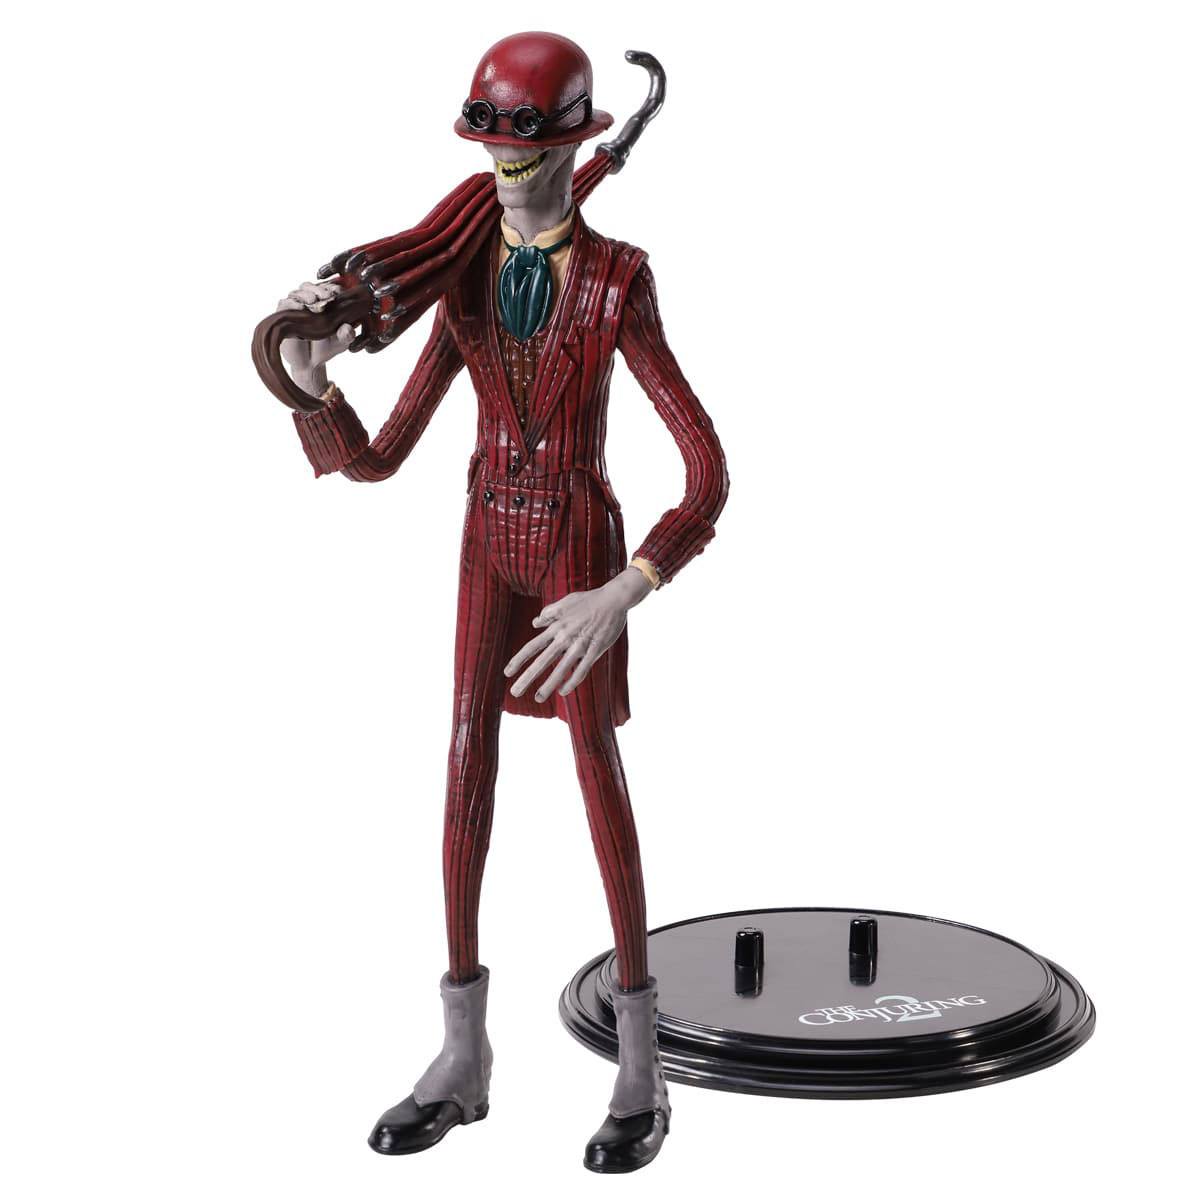 Conjuring - The Crooked Man - Toyllectibles bendyfigs